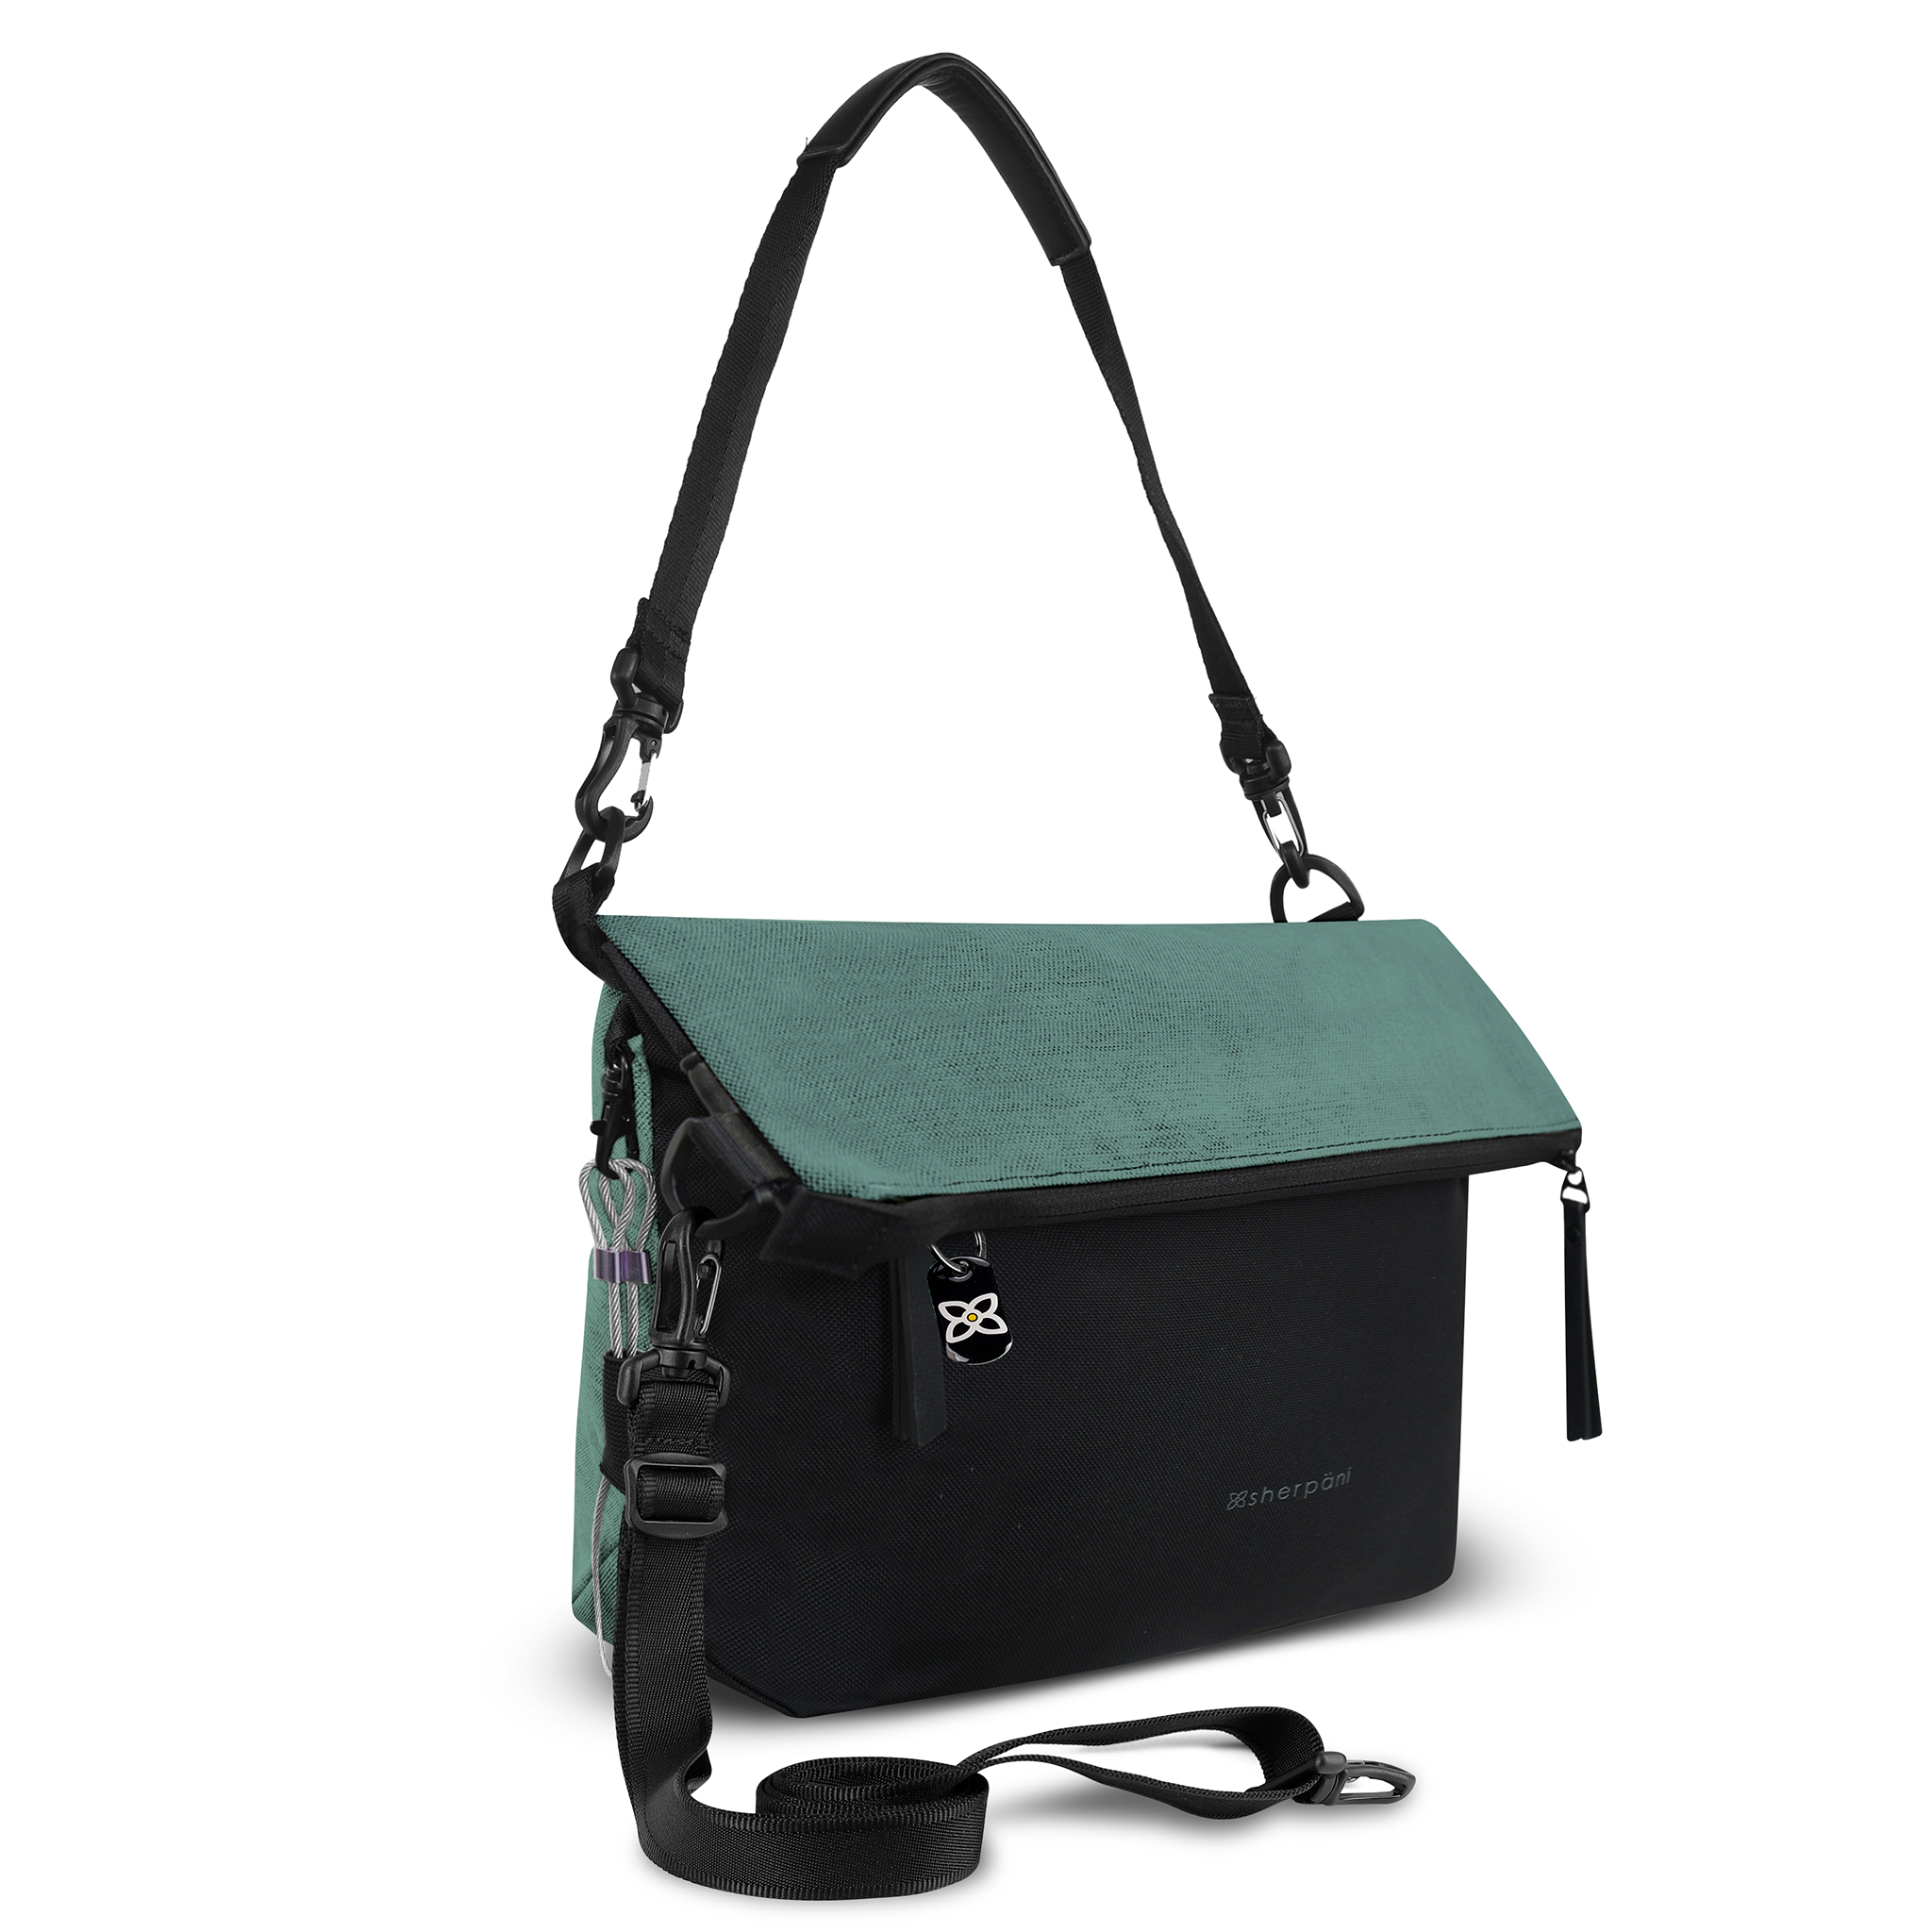 Angled front view of Sherpani's Anti-Theft bag, the Vale AT in Teal, with vegan leather accents in black. The top is folded over creating a signature overlap look. A chair loop lock is connected to a key fob clip on one side. It has an adjustable/detachable crossbody strap, and a second detachable strap fixed at a shorter length.